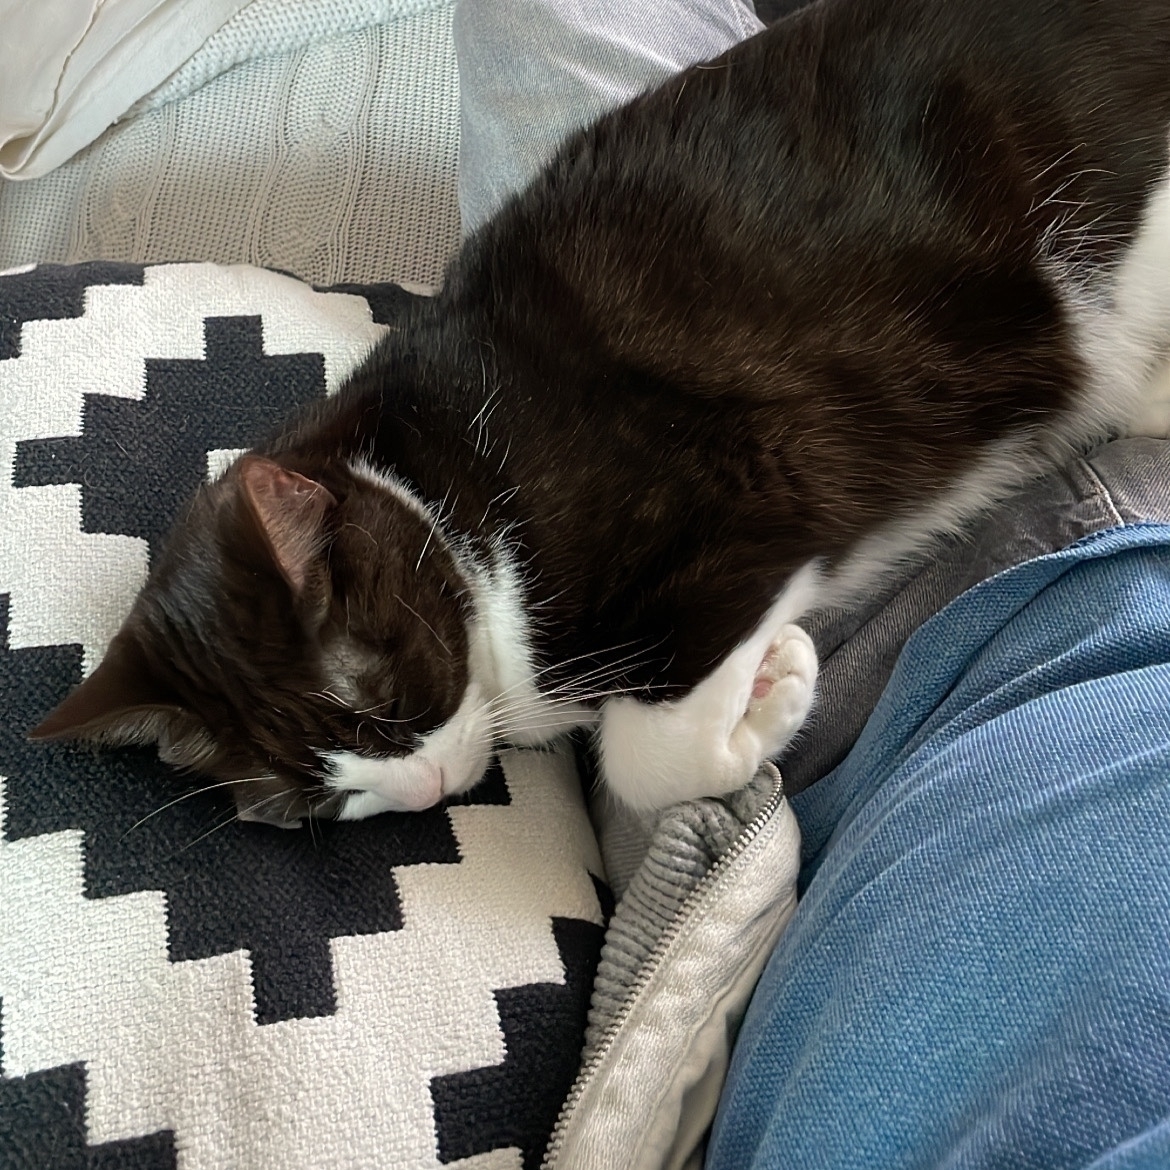 A black and white cat asleep on a man’s lap with their head resting on a black and white chequered pillow. One paw is visible, tucked under the body. The man has a blue shirt and old jeans on.